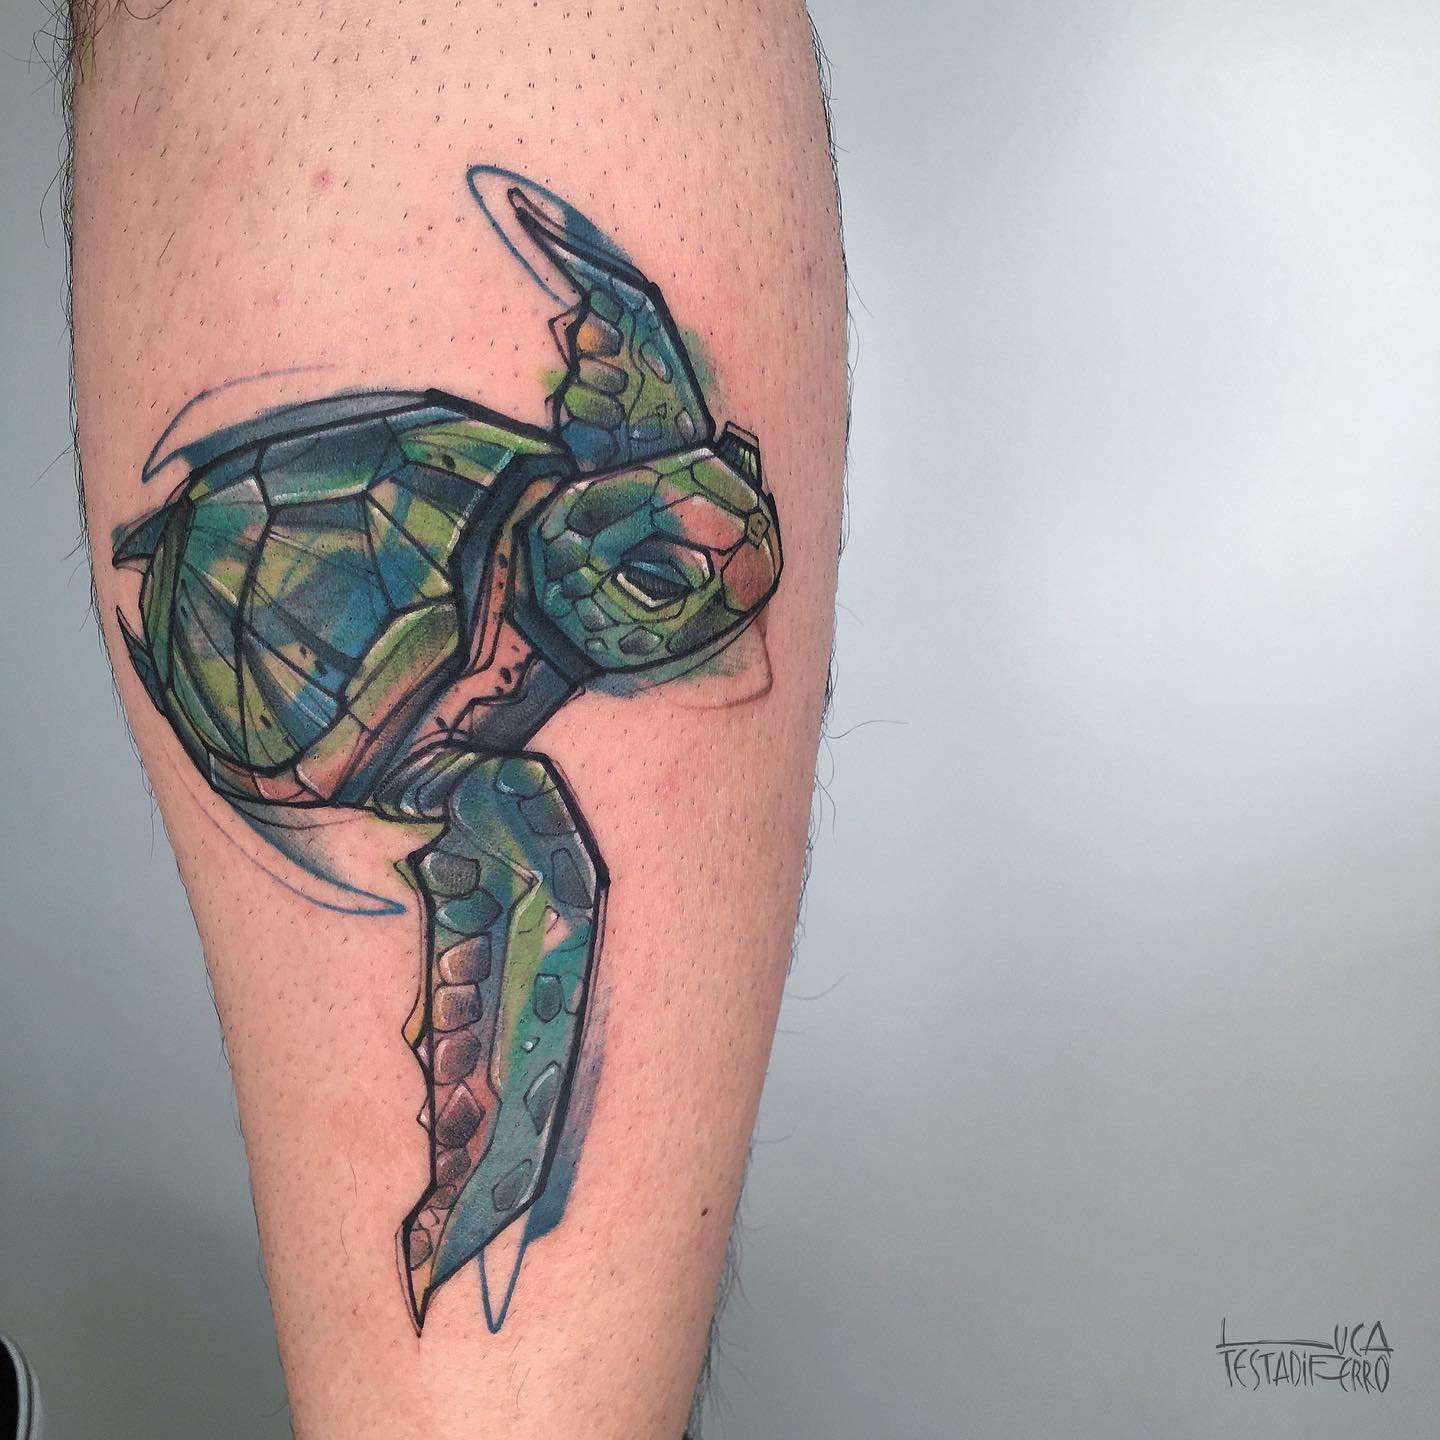 Colored inked turtle tattoo on the calf